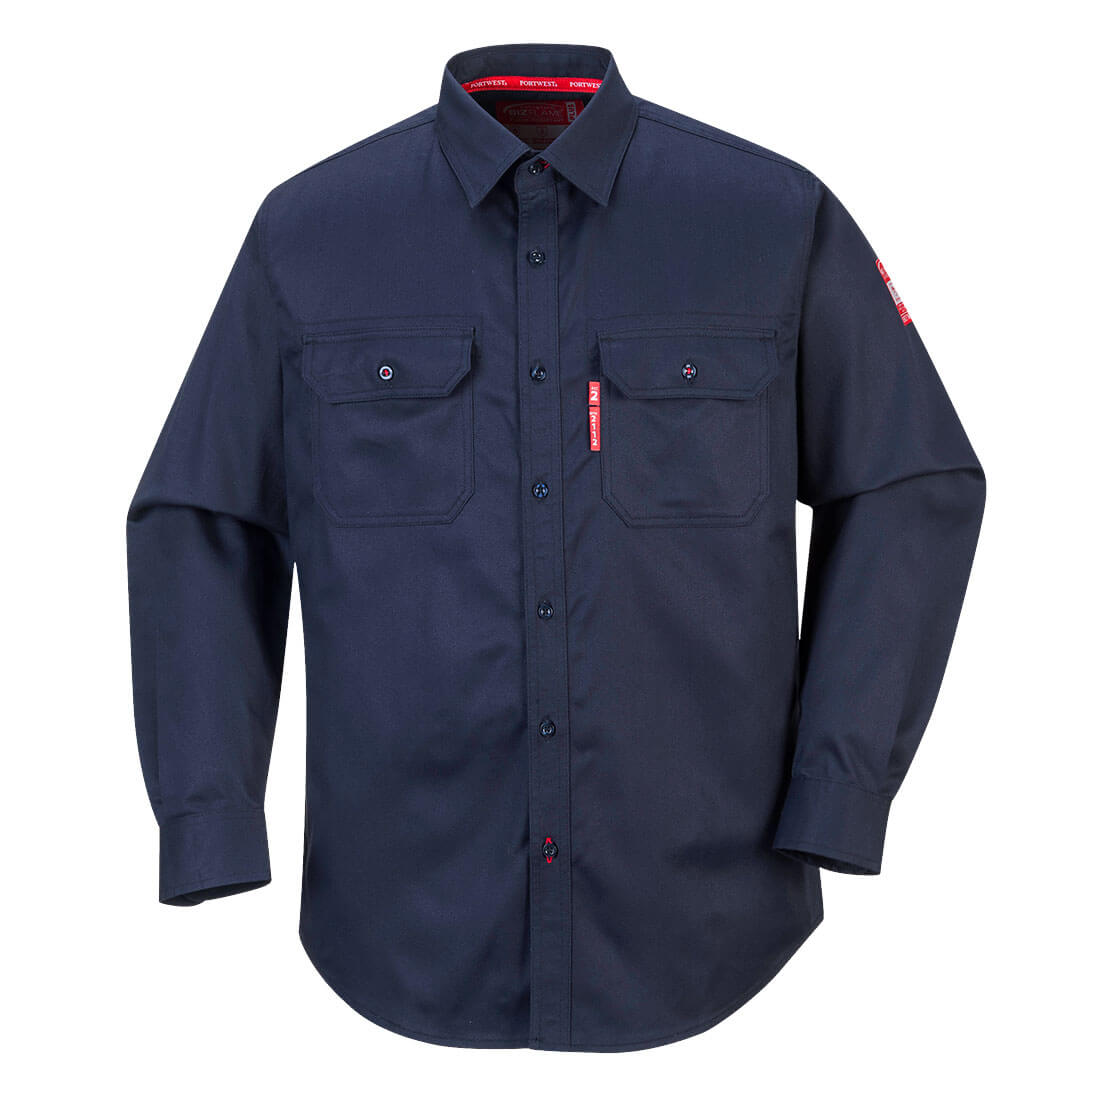 Flame Resistant, Shirts